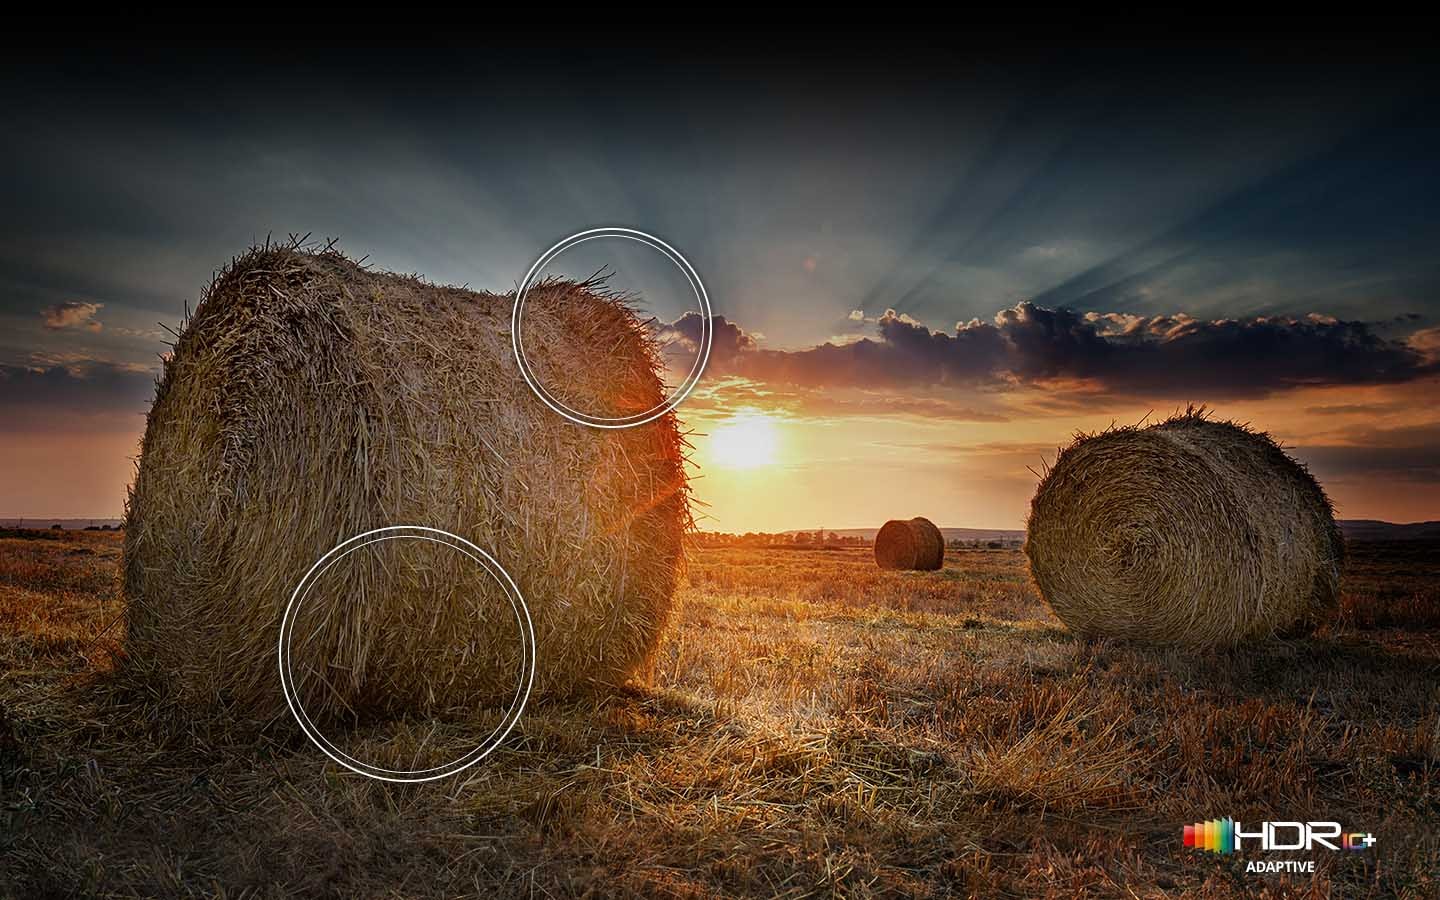 The sun is setting over a wide field with emphasis on a large hay stack. The scene after applying HDR 10 ADAPTIVE/GAMING technology is much brighter and crisper than the SDR version.